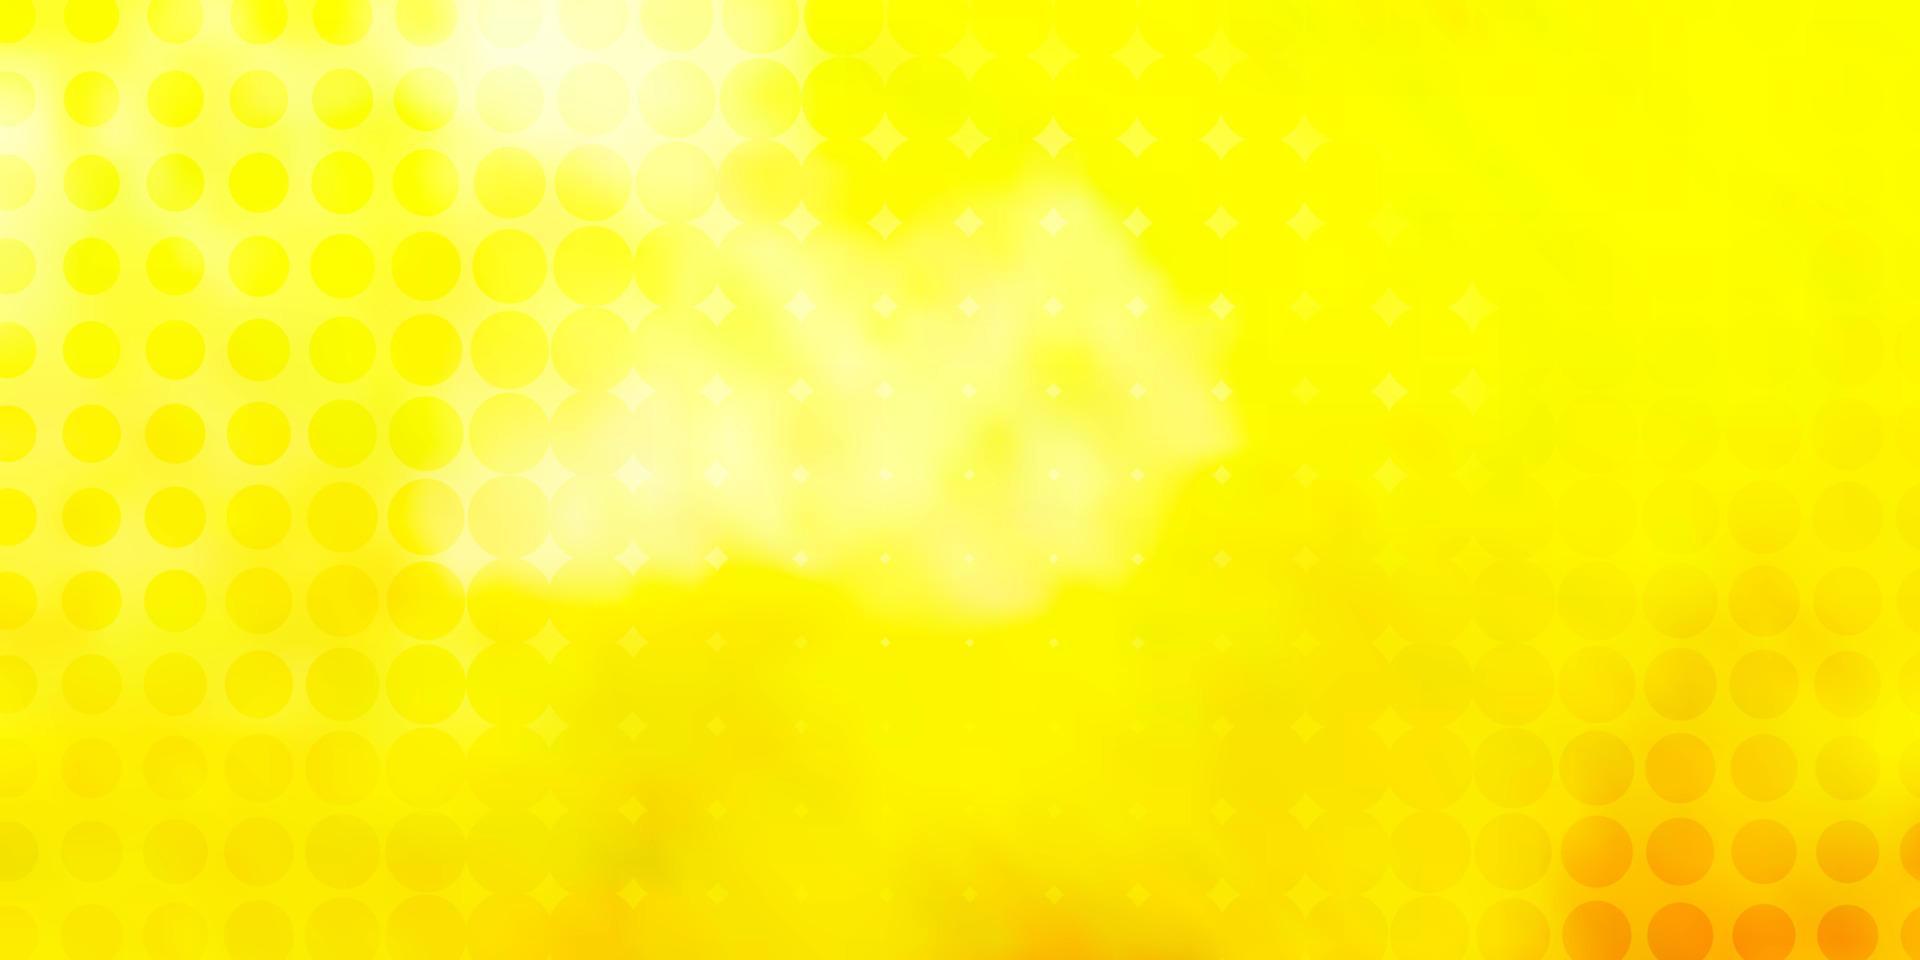 Light Yellow vector layout with circles.